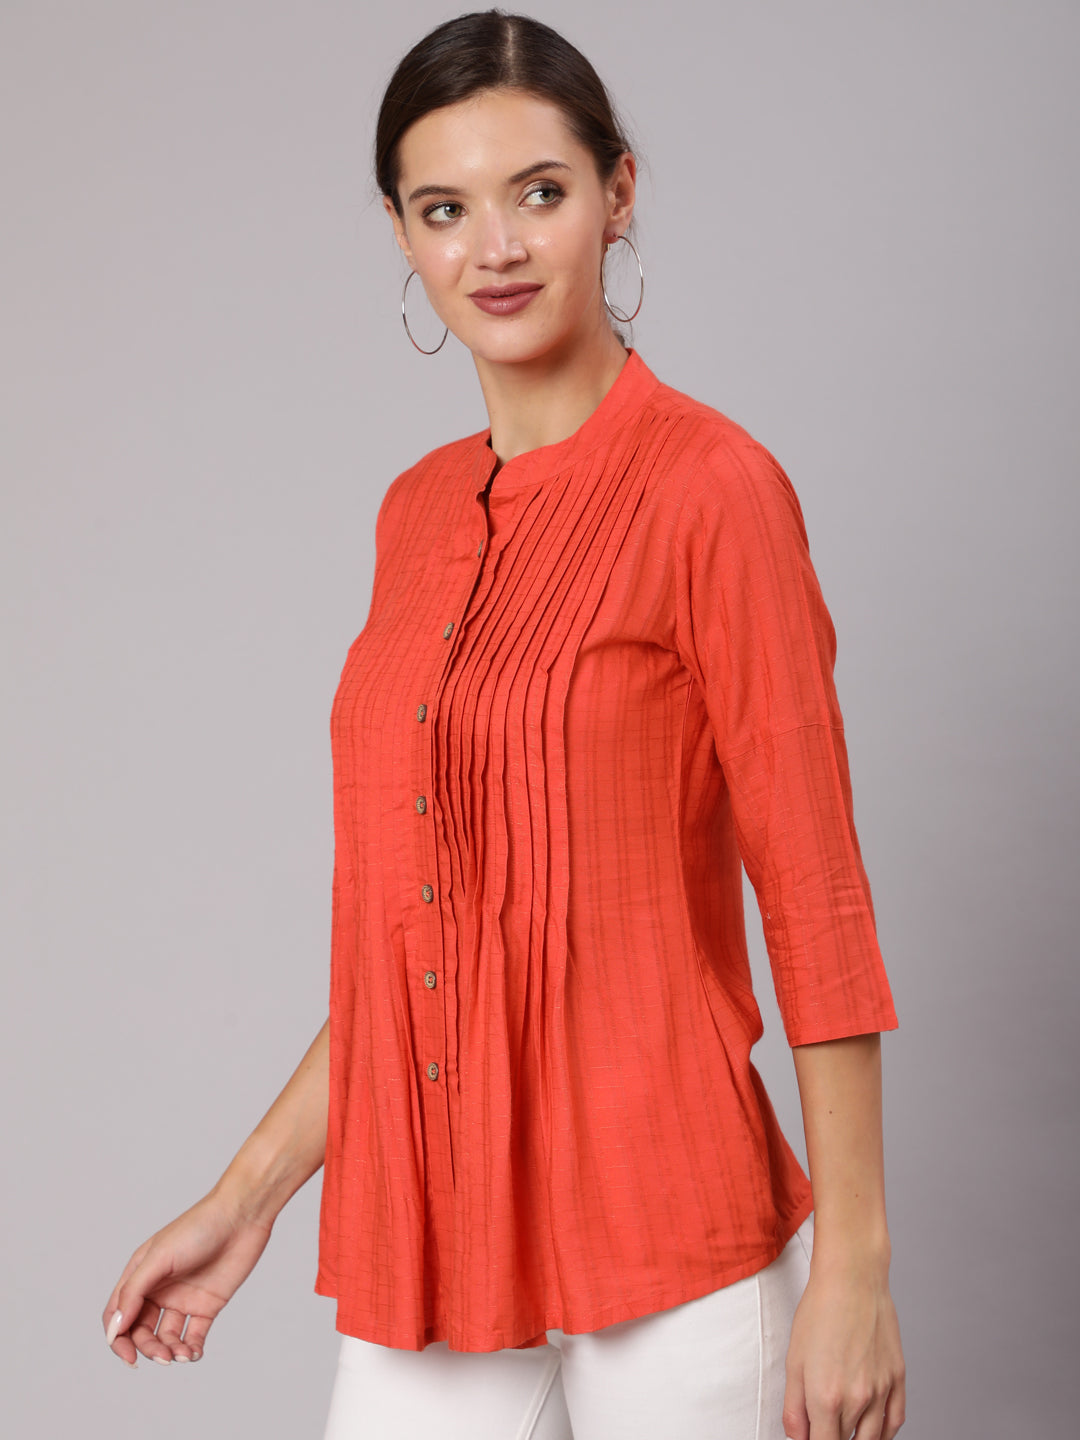 Round neck Pleated Top With Buttons In Front